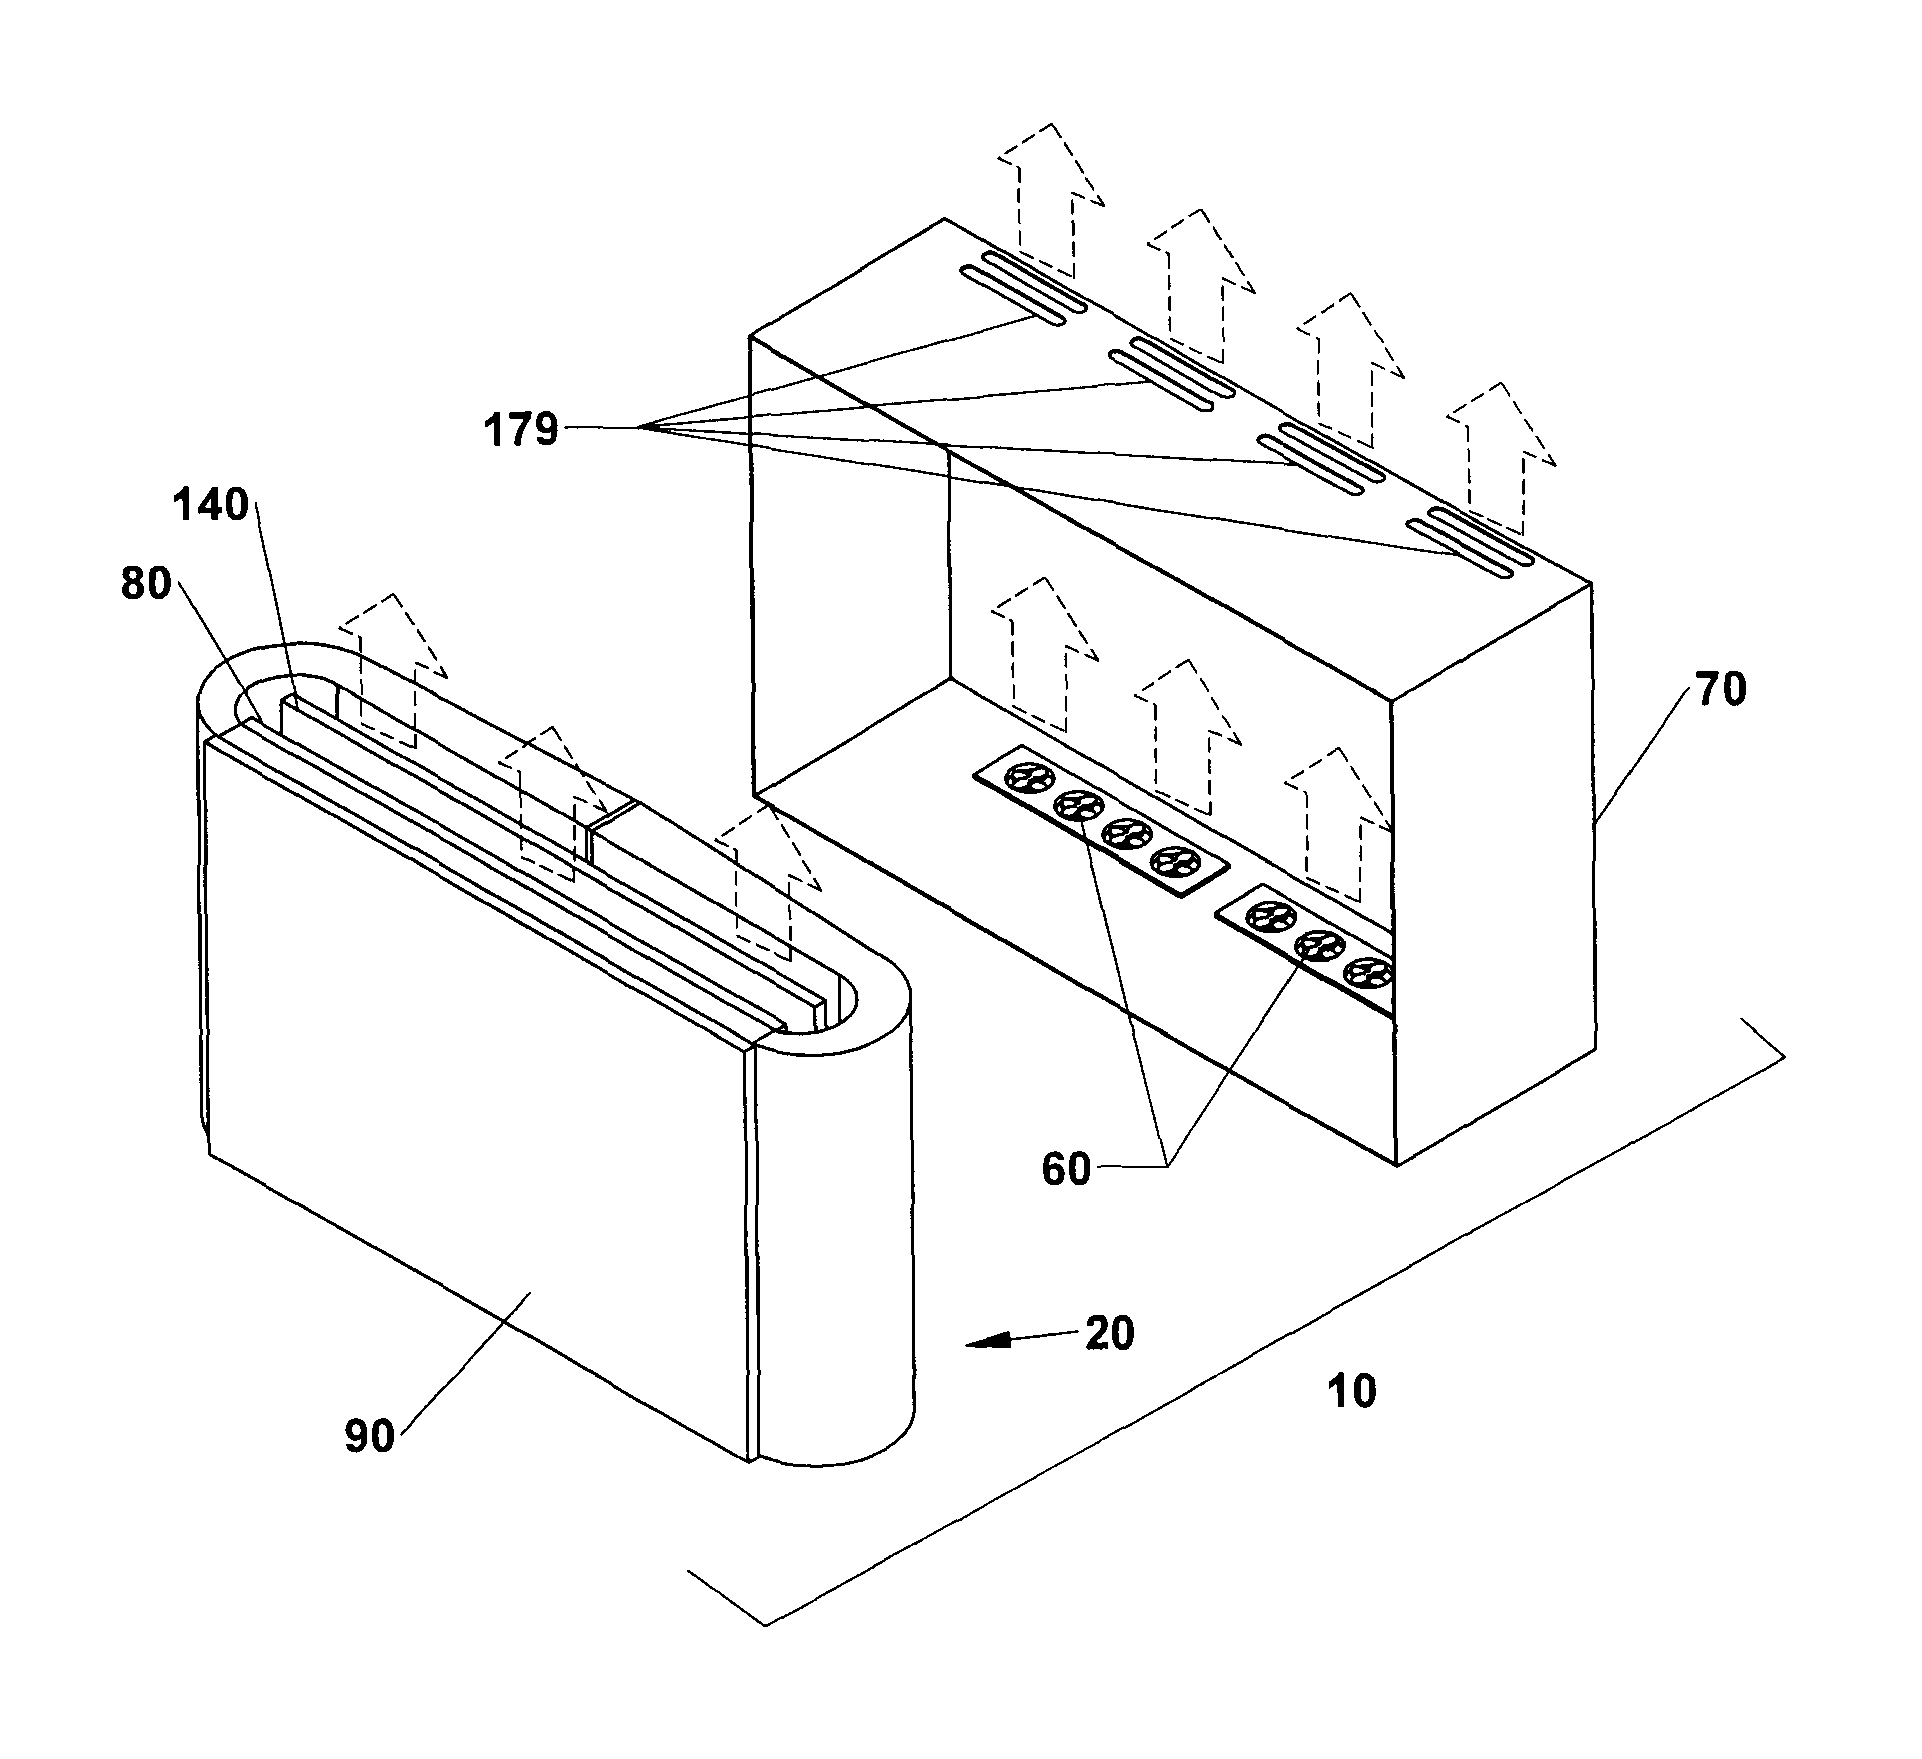 Isolated cooling system having an insulator gap and front polarizer